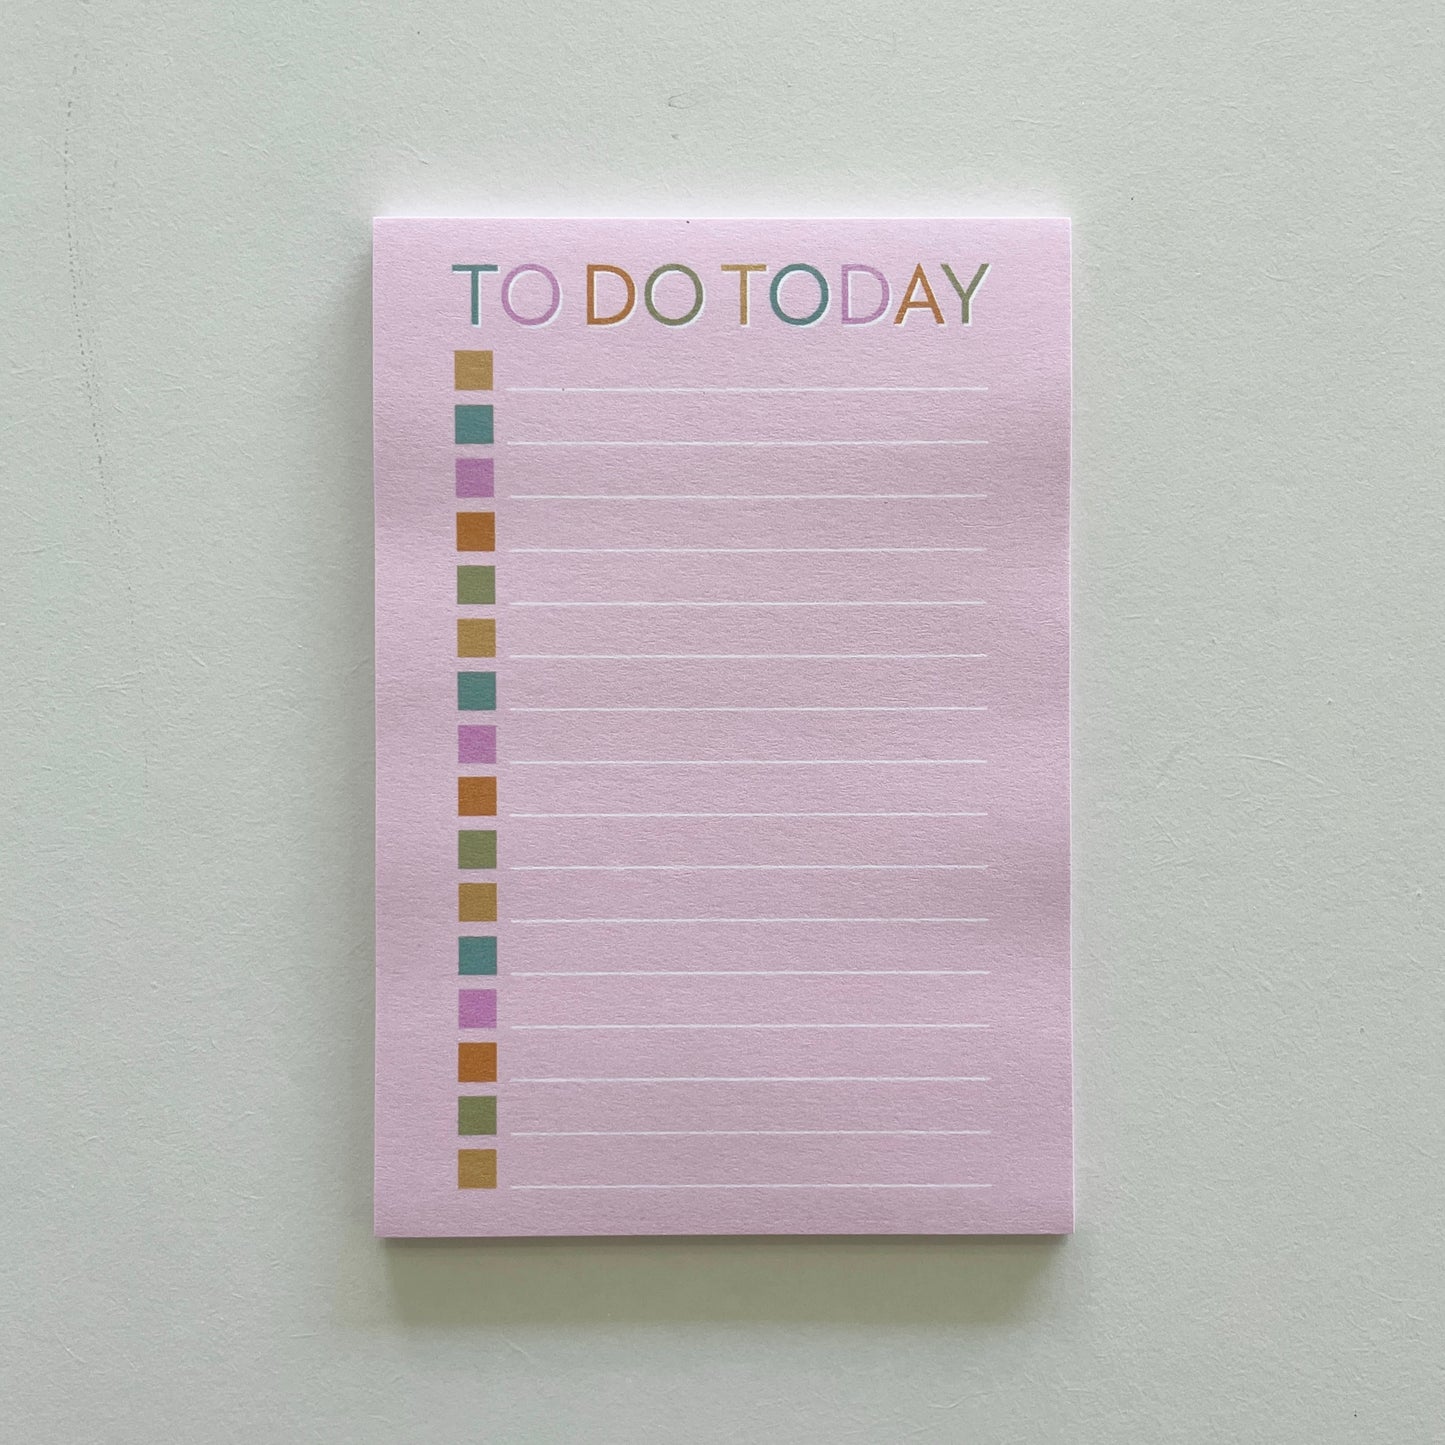 To Do Today Extra Large Post-It Note Pad